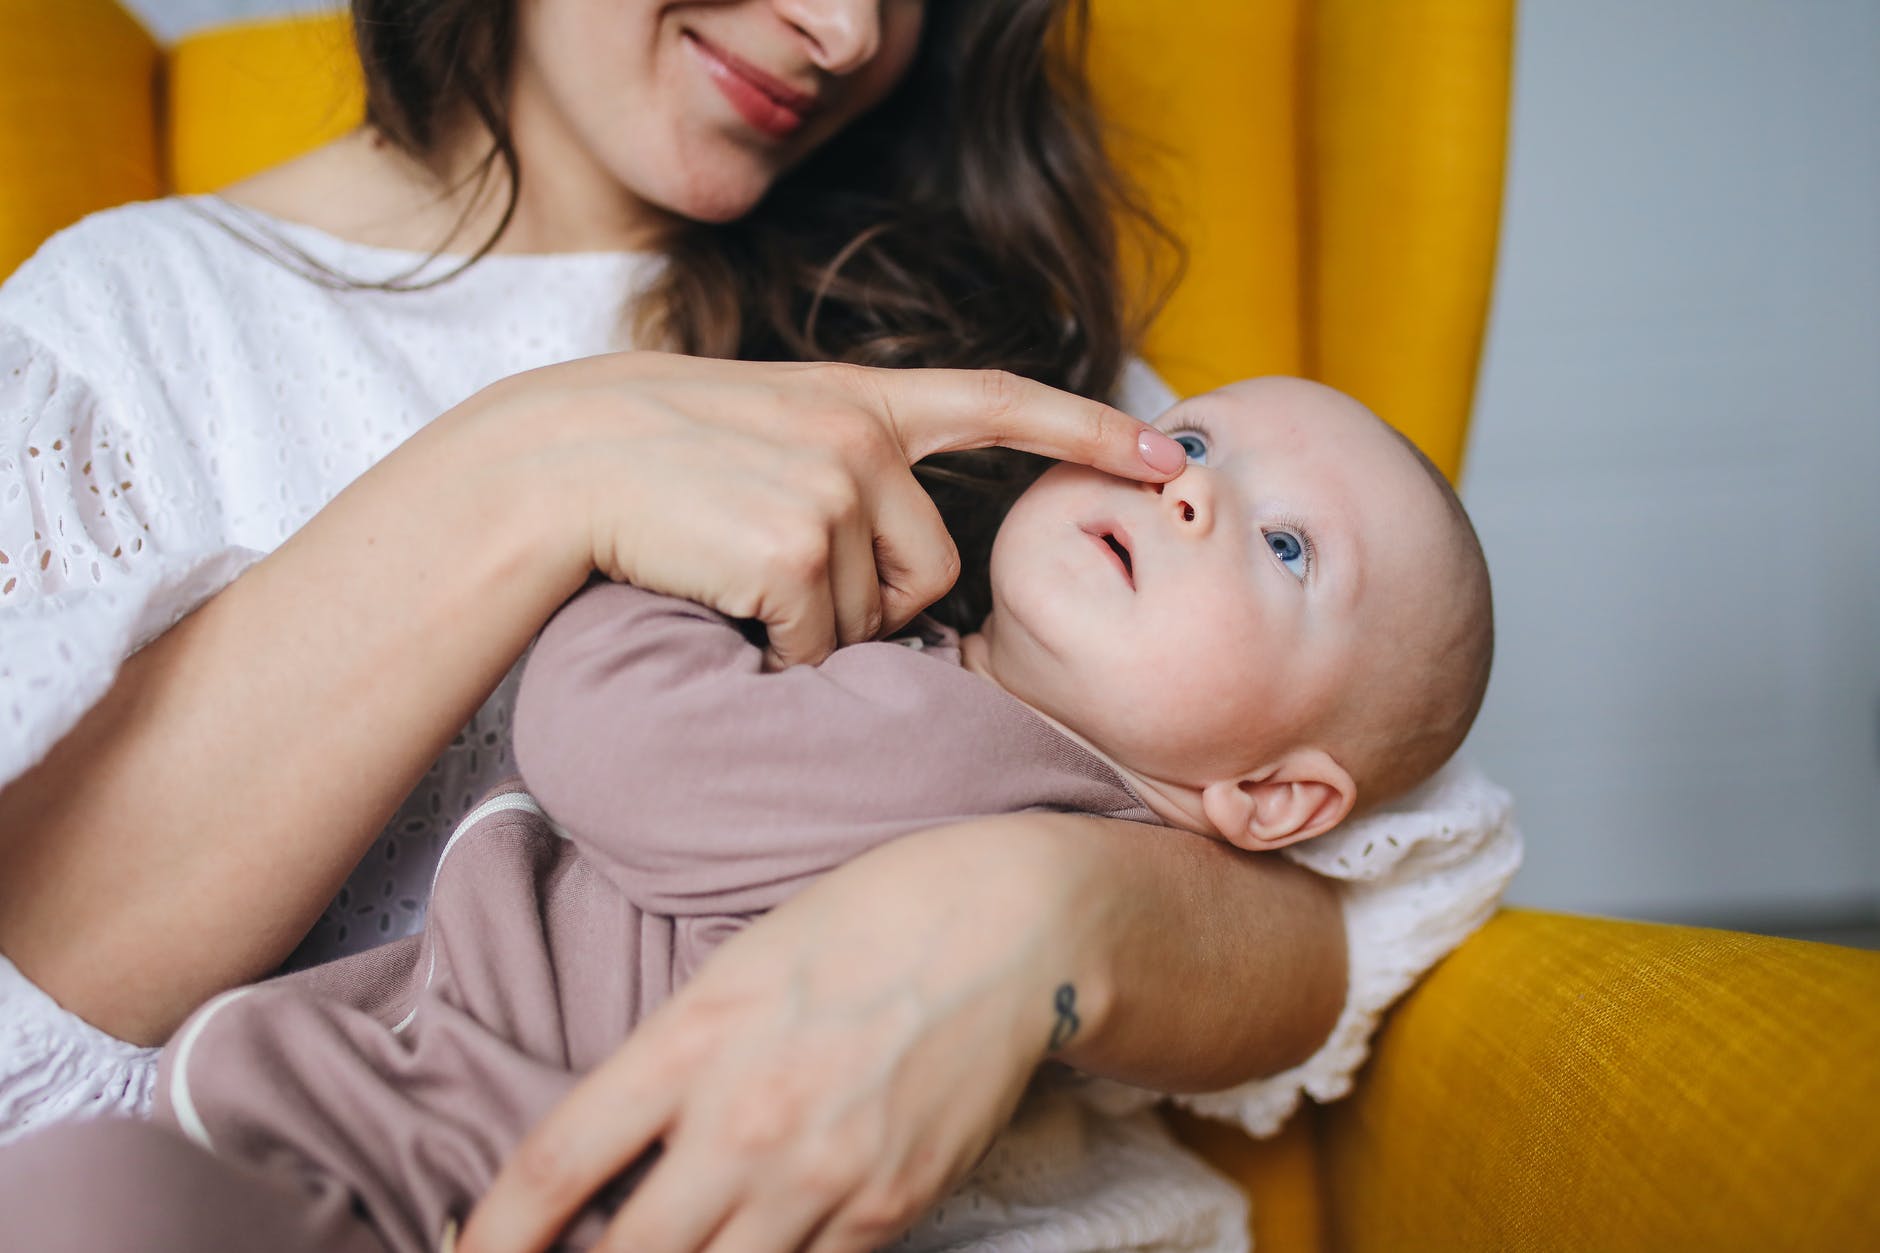 They cherished the baby, but it was not for long. | Source: Pexels